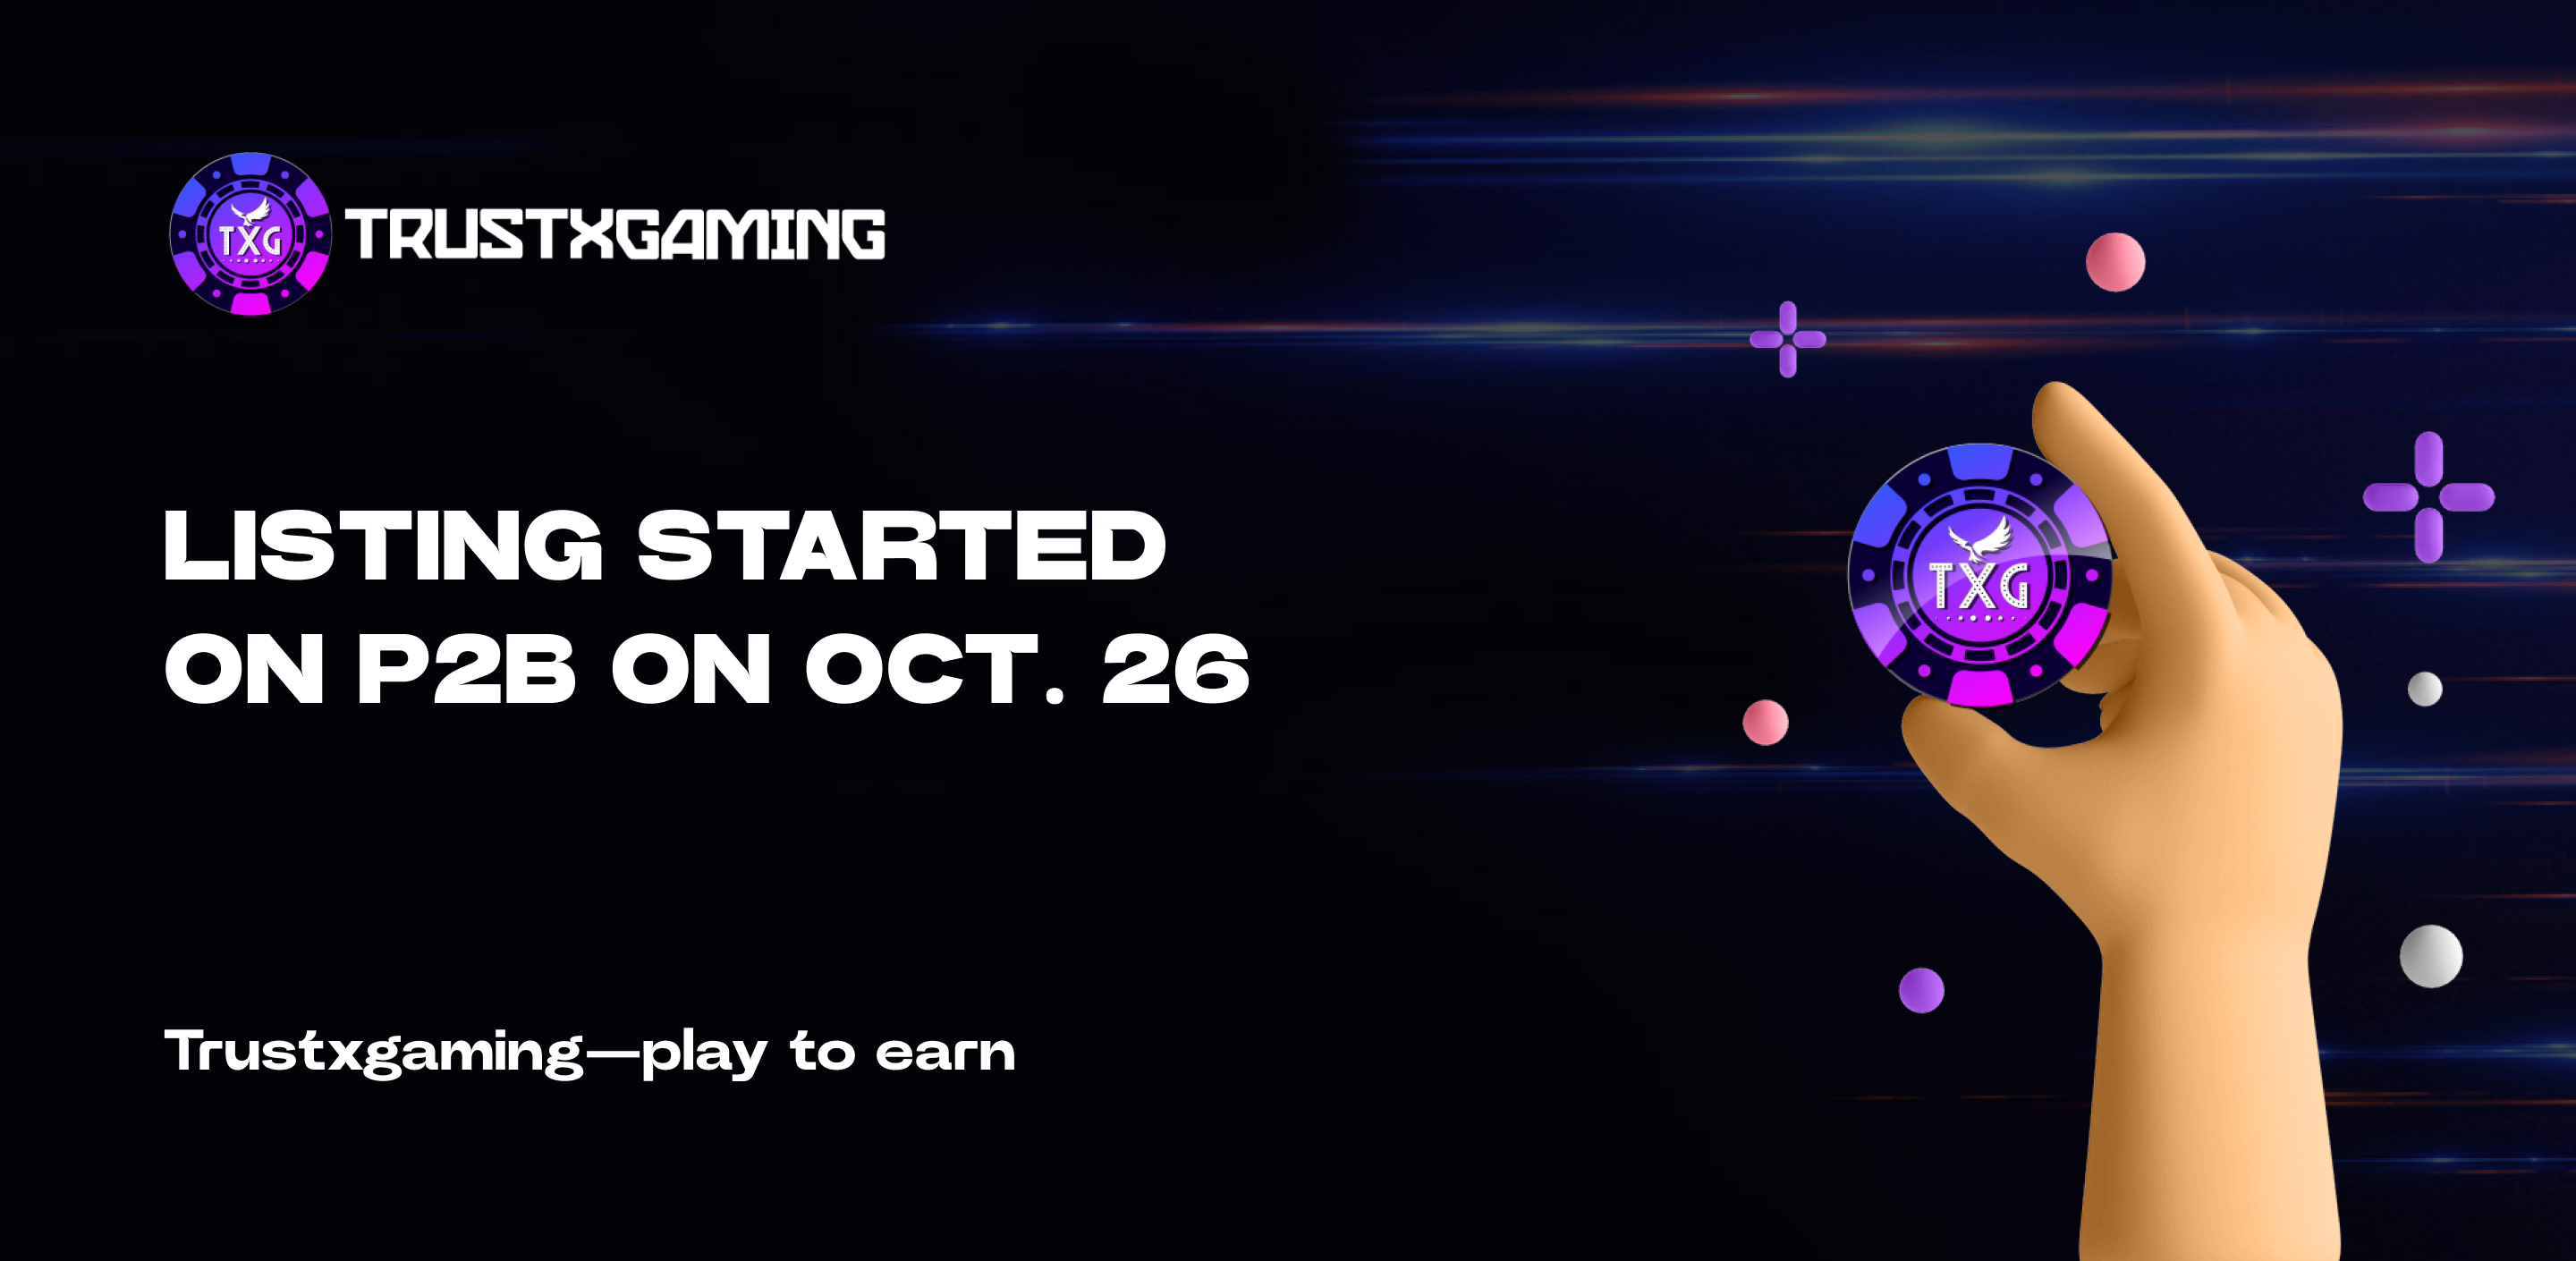 Trustxgaming Revolutionizes the Gaming Industry with Blockchain-based Play-to-Earn Platform